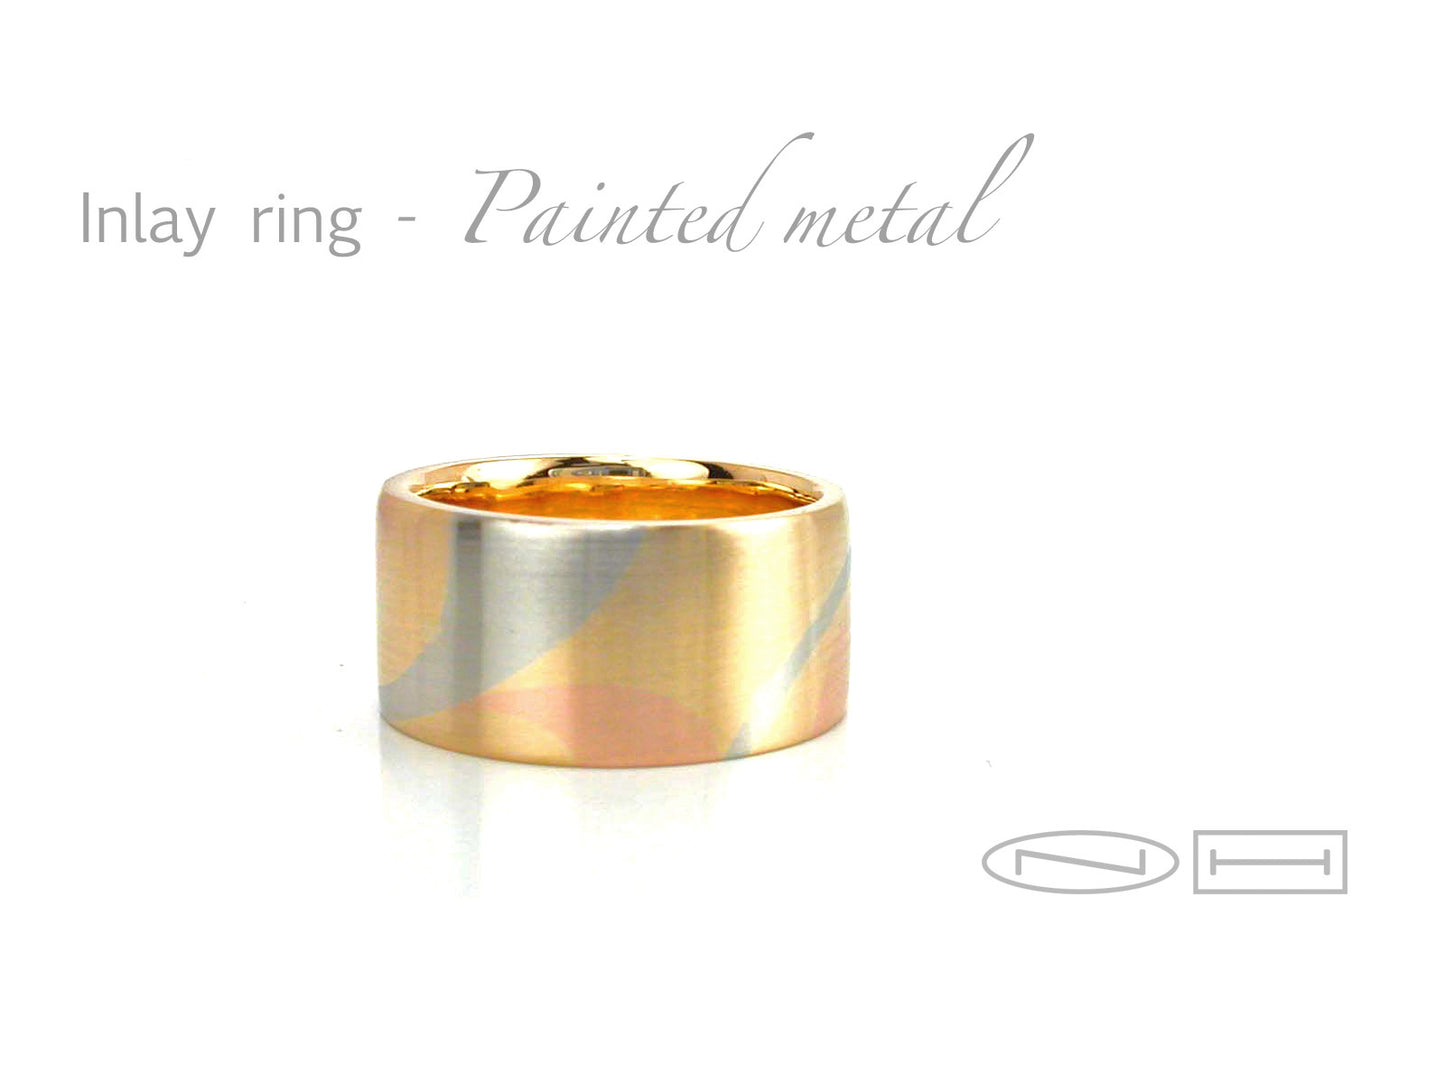 Marriage of metal 18kt yellow, white and red gold, by ZEALmetal., Nicole Horlor, in Kingston, ON, Canada